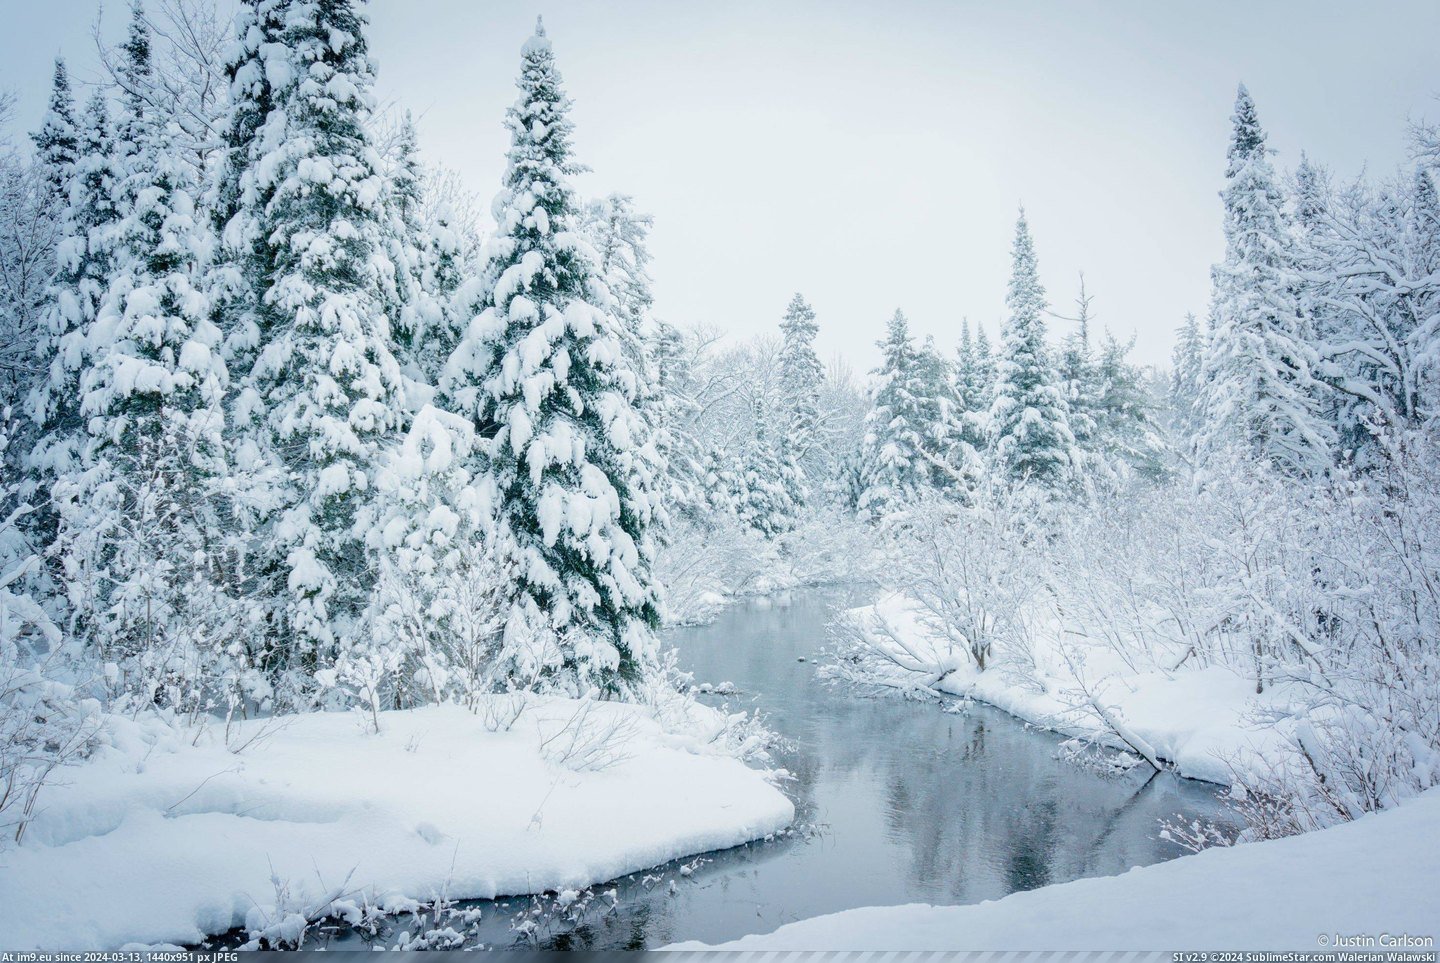 #Photo #River #Michigan #Snowfall #4912x3264 #Upper #Peninsula #Justin [Earthporn] The Carp River after today's snowfall in Michigan's Upper Peninsula. Photo by Justin Carlson [4912x3264] Pic. (Image of album My r/EARTHPORN favs))